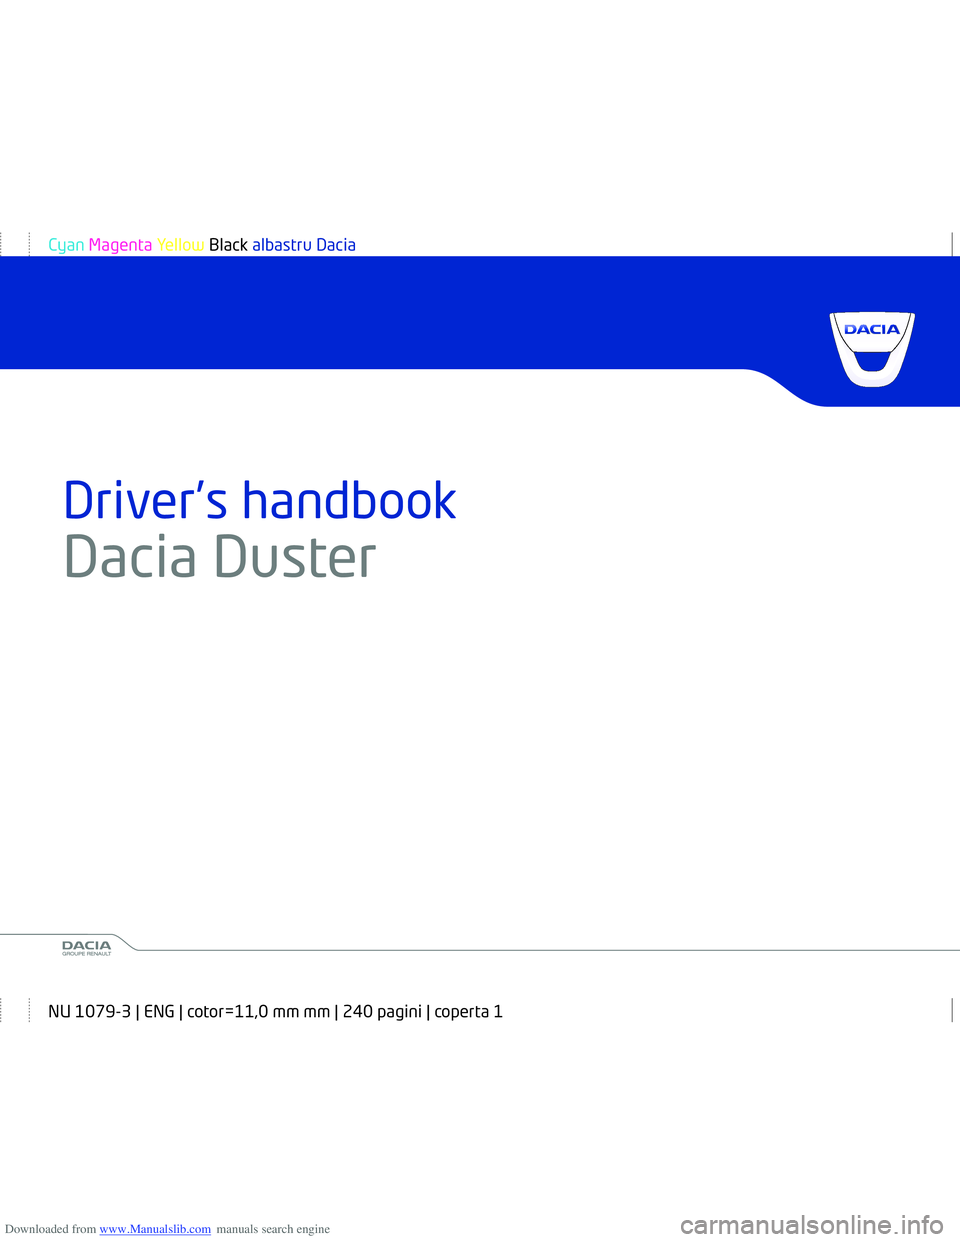 DACIA DUSTER 2016  Owners Manual Downloaded from www.Manualslib.com manuals search engine www.daciagroup.com
Driver’s handbook
Dacia  Duster        
Ref 999101781R / édition anglaiseNU 1079-3 - 07/2014
Cyan Magenta Yellow Black al